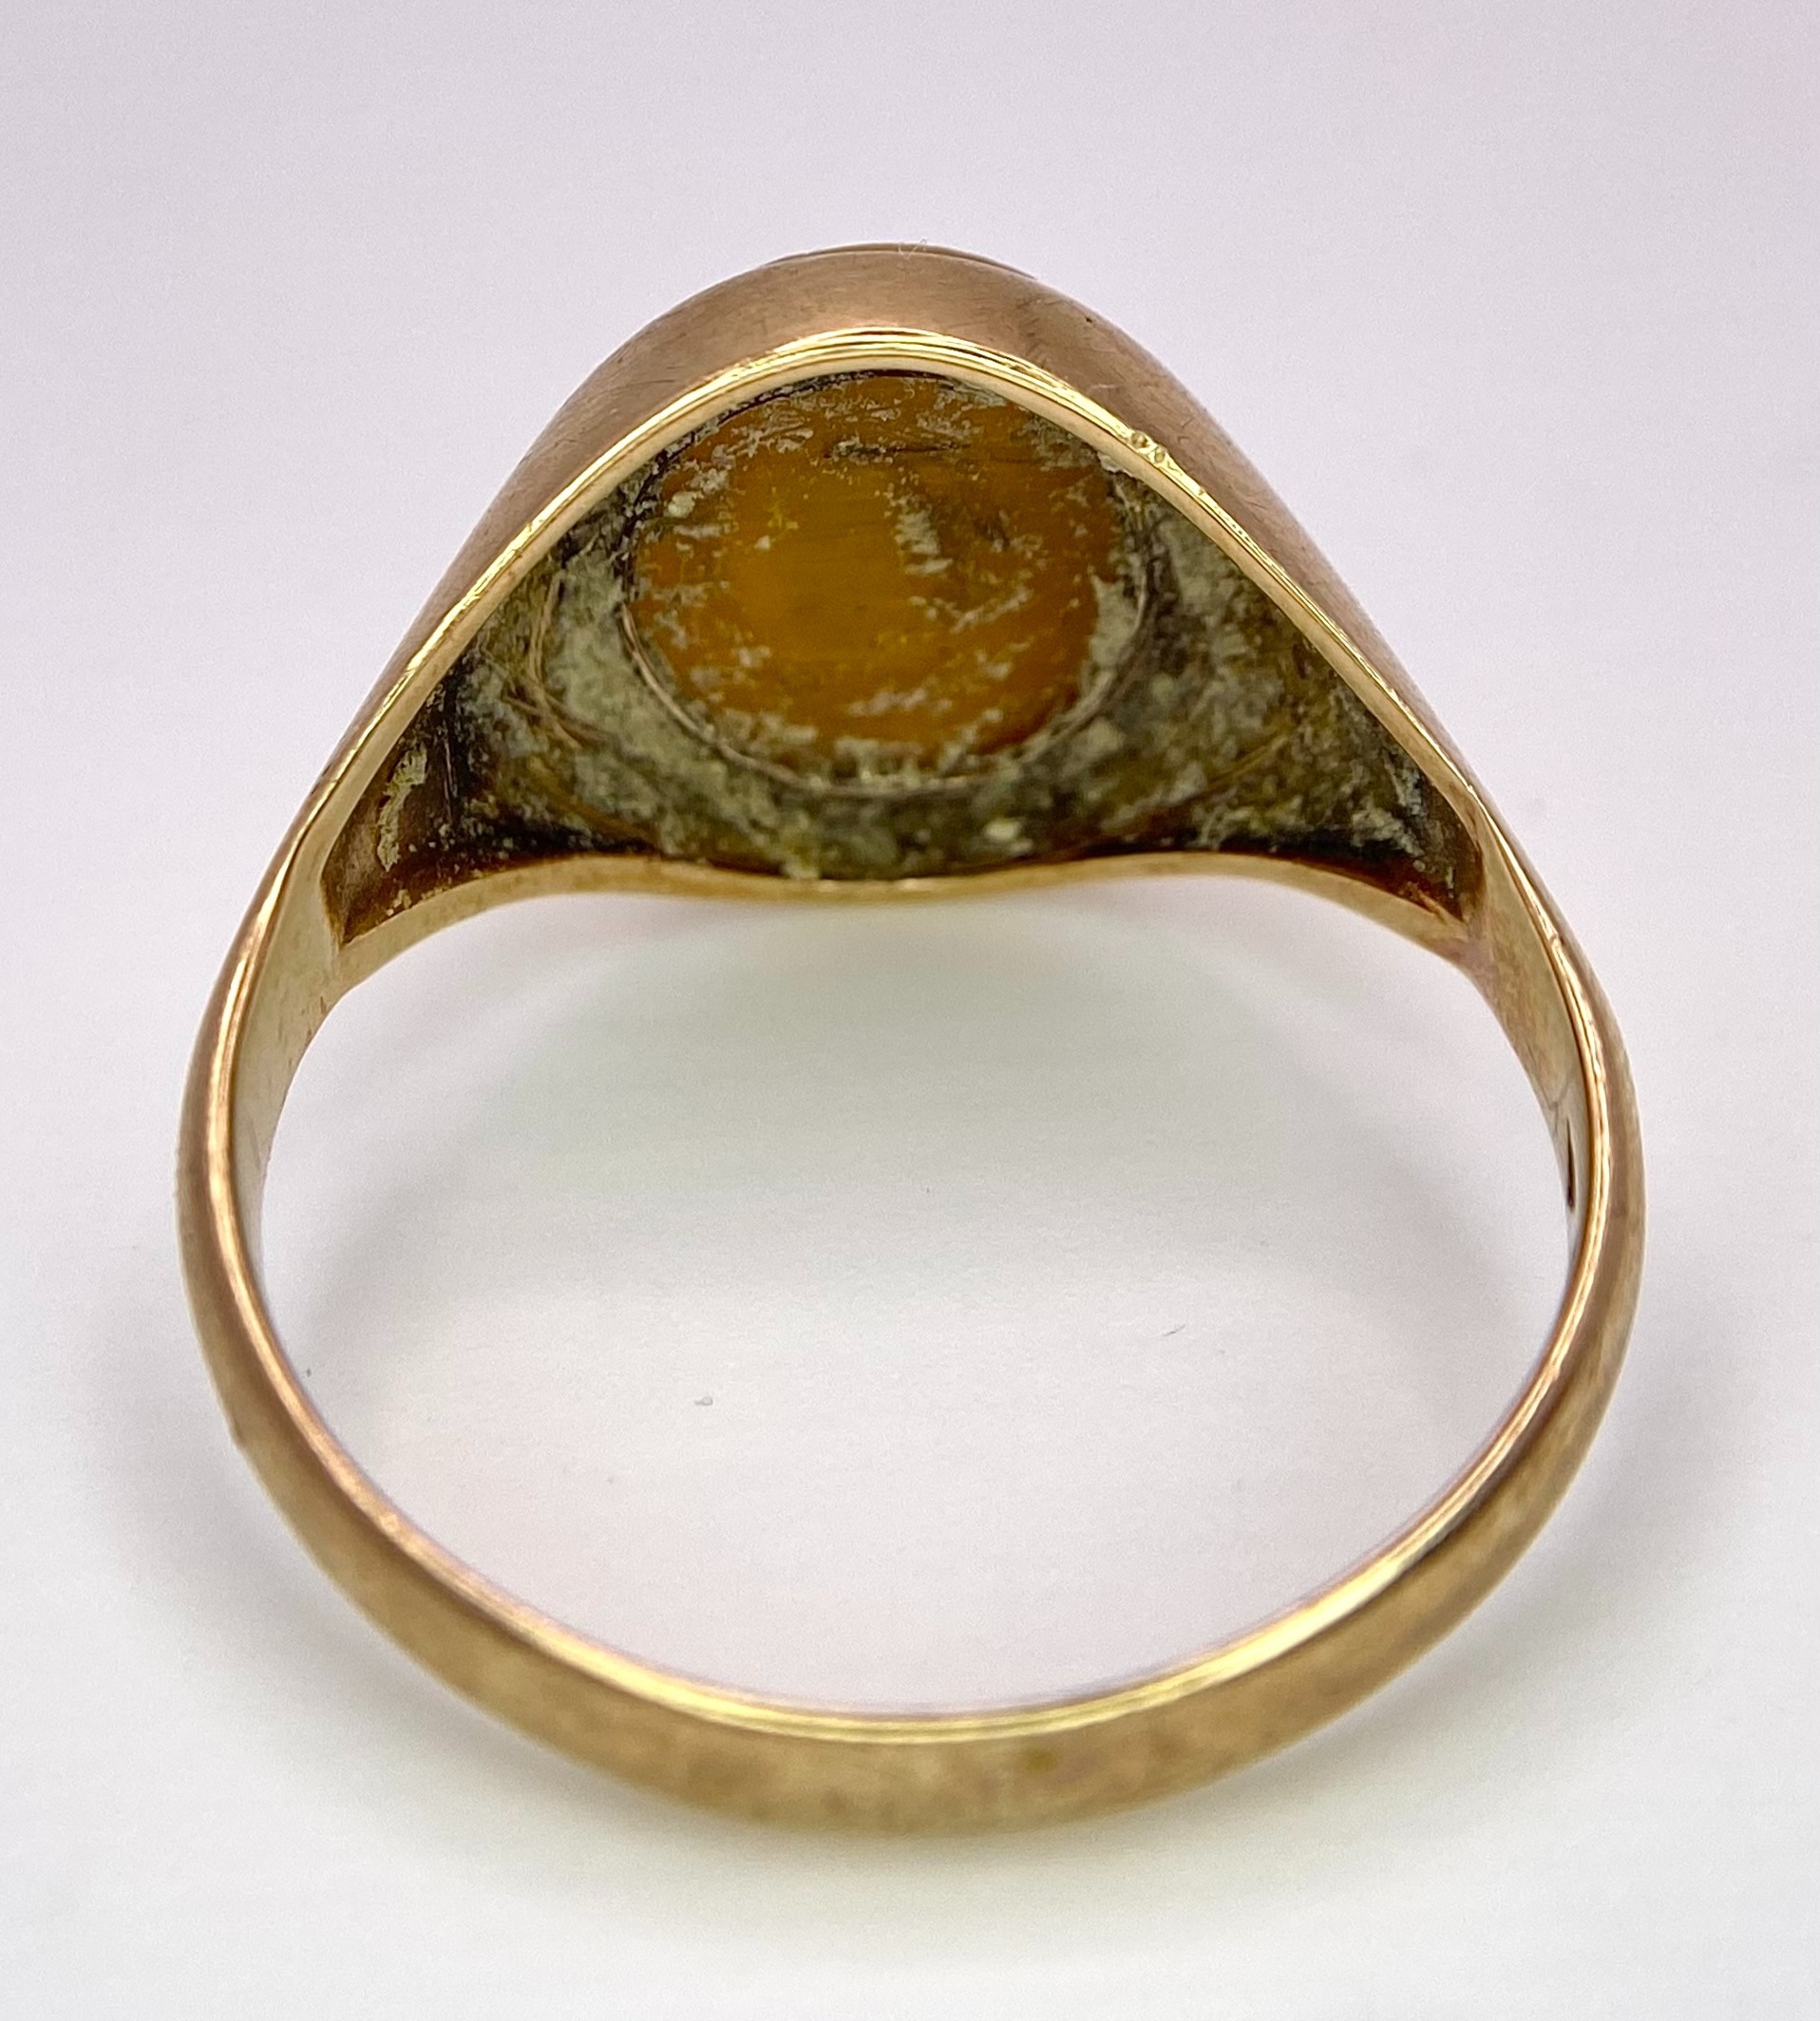 A Vintage 9K Yellow Gold Tigers Eye Ring. Size U. 3.95g total weight. - Image 5 of 6